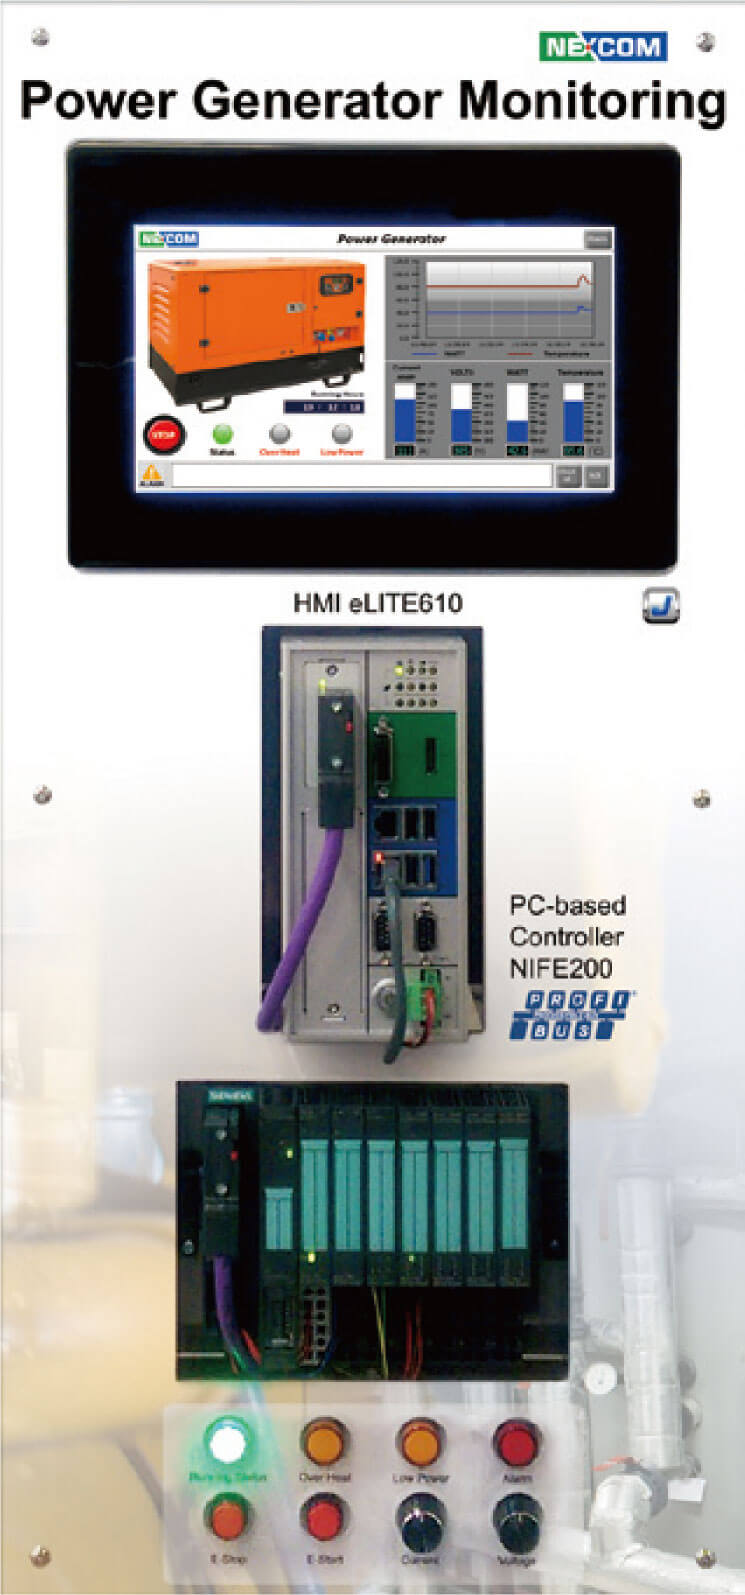 Multi-fieldbus communication PC-based controller with CODESYS RTE HMI with JMobile runtime included Scenario for power generator simulation with 4 indicators, 2 push button and 2 knobs